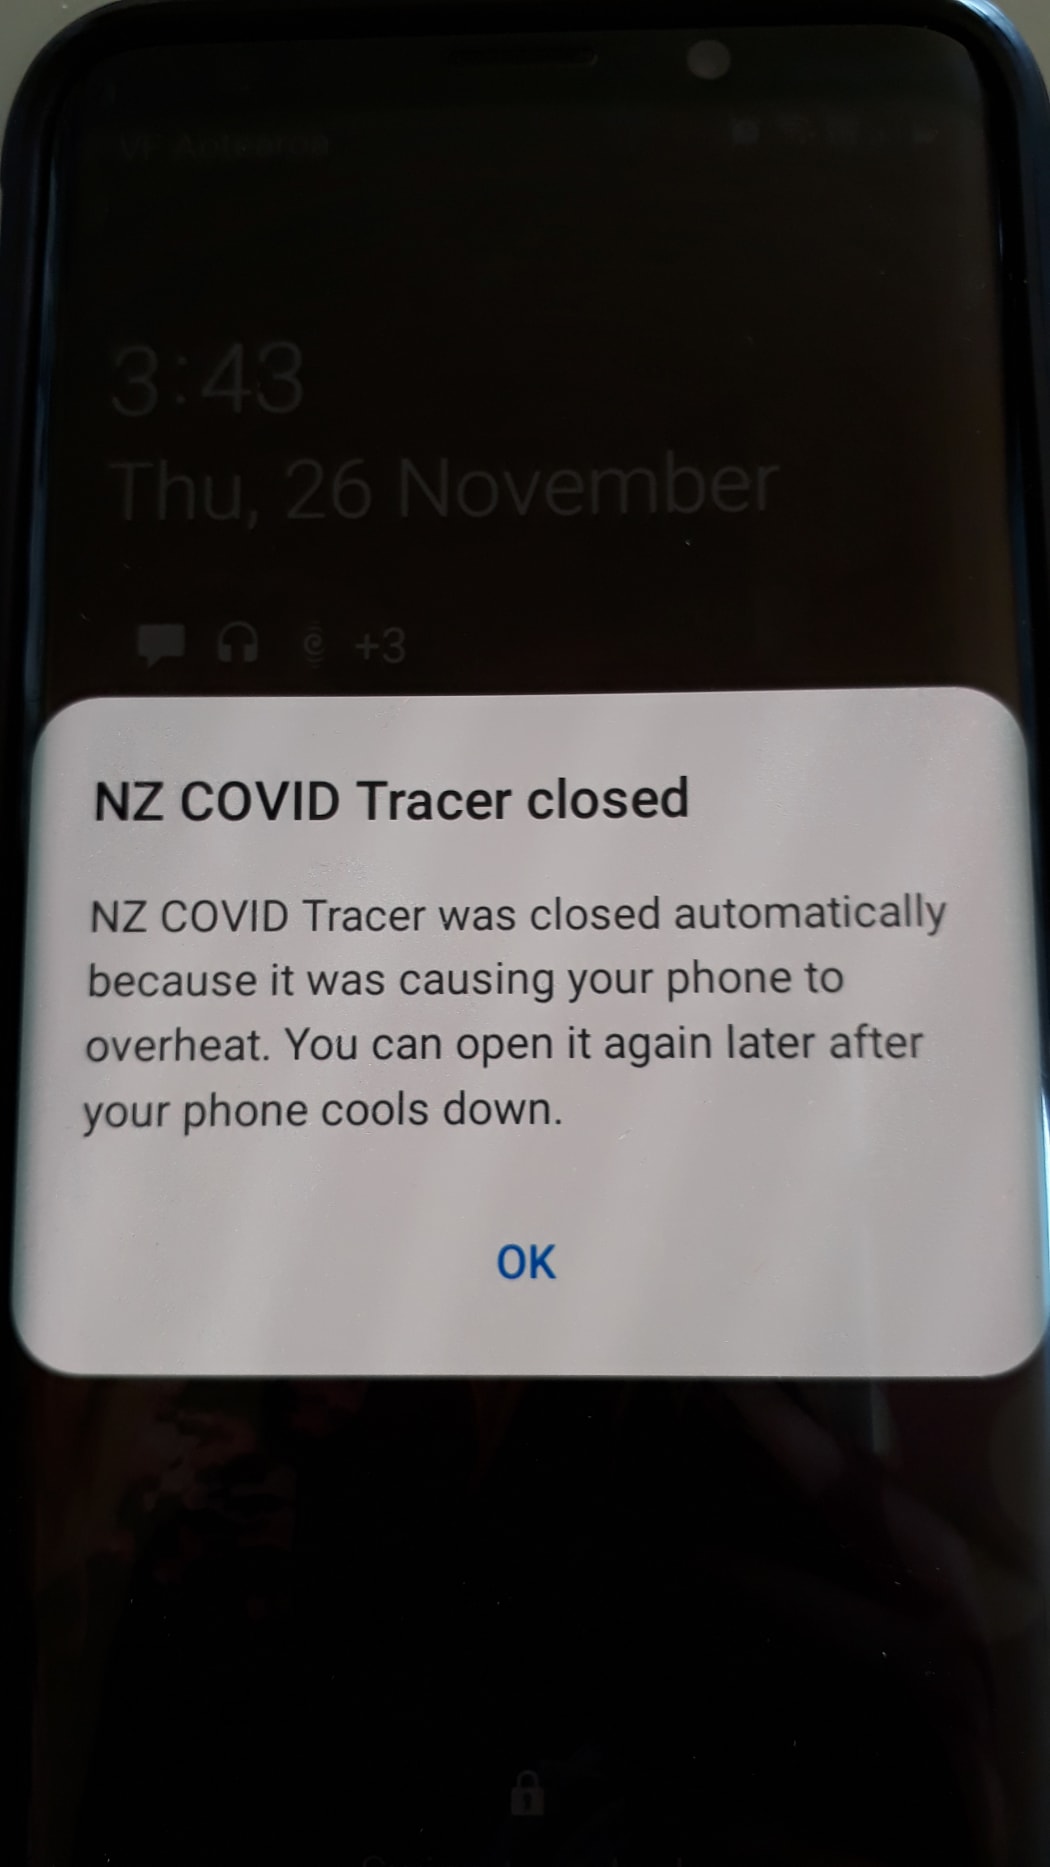 The phone covid app closed because it was causing the phone to overheat.